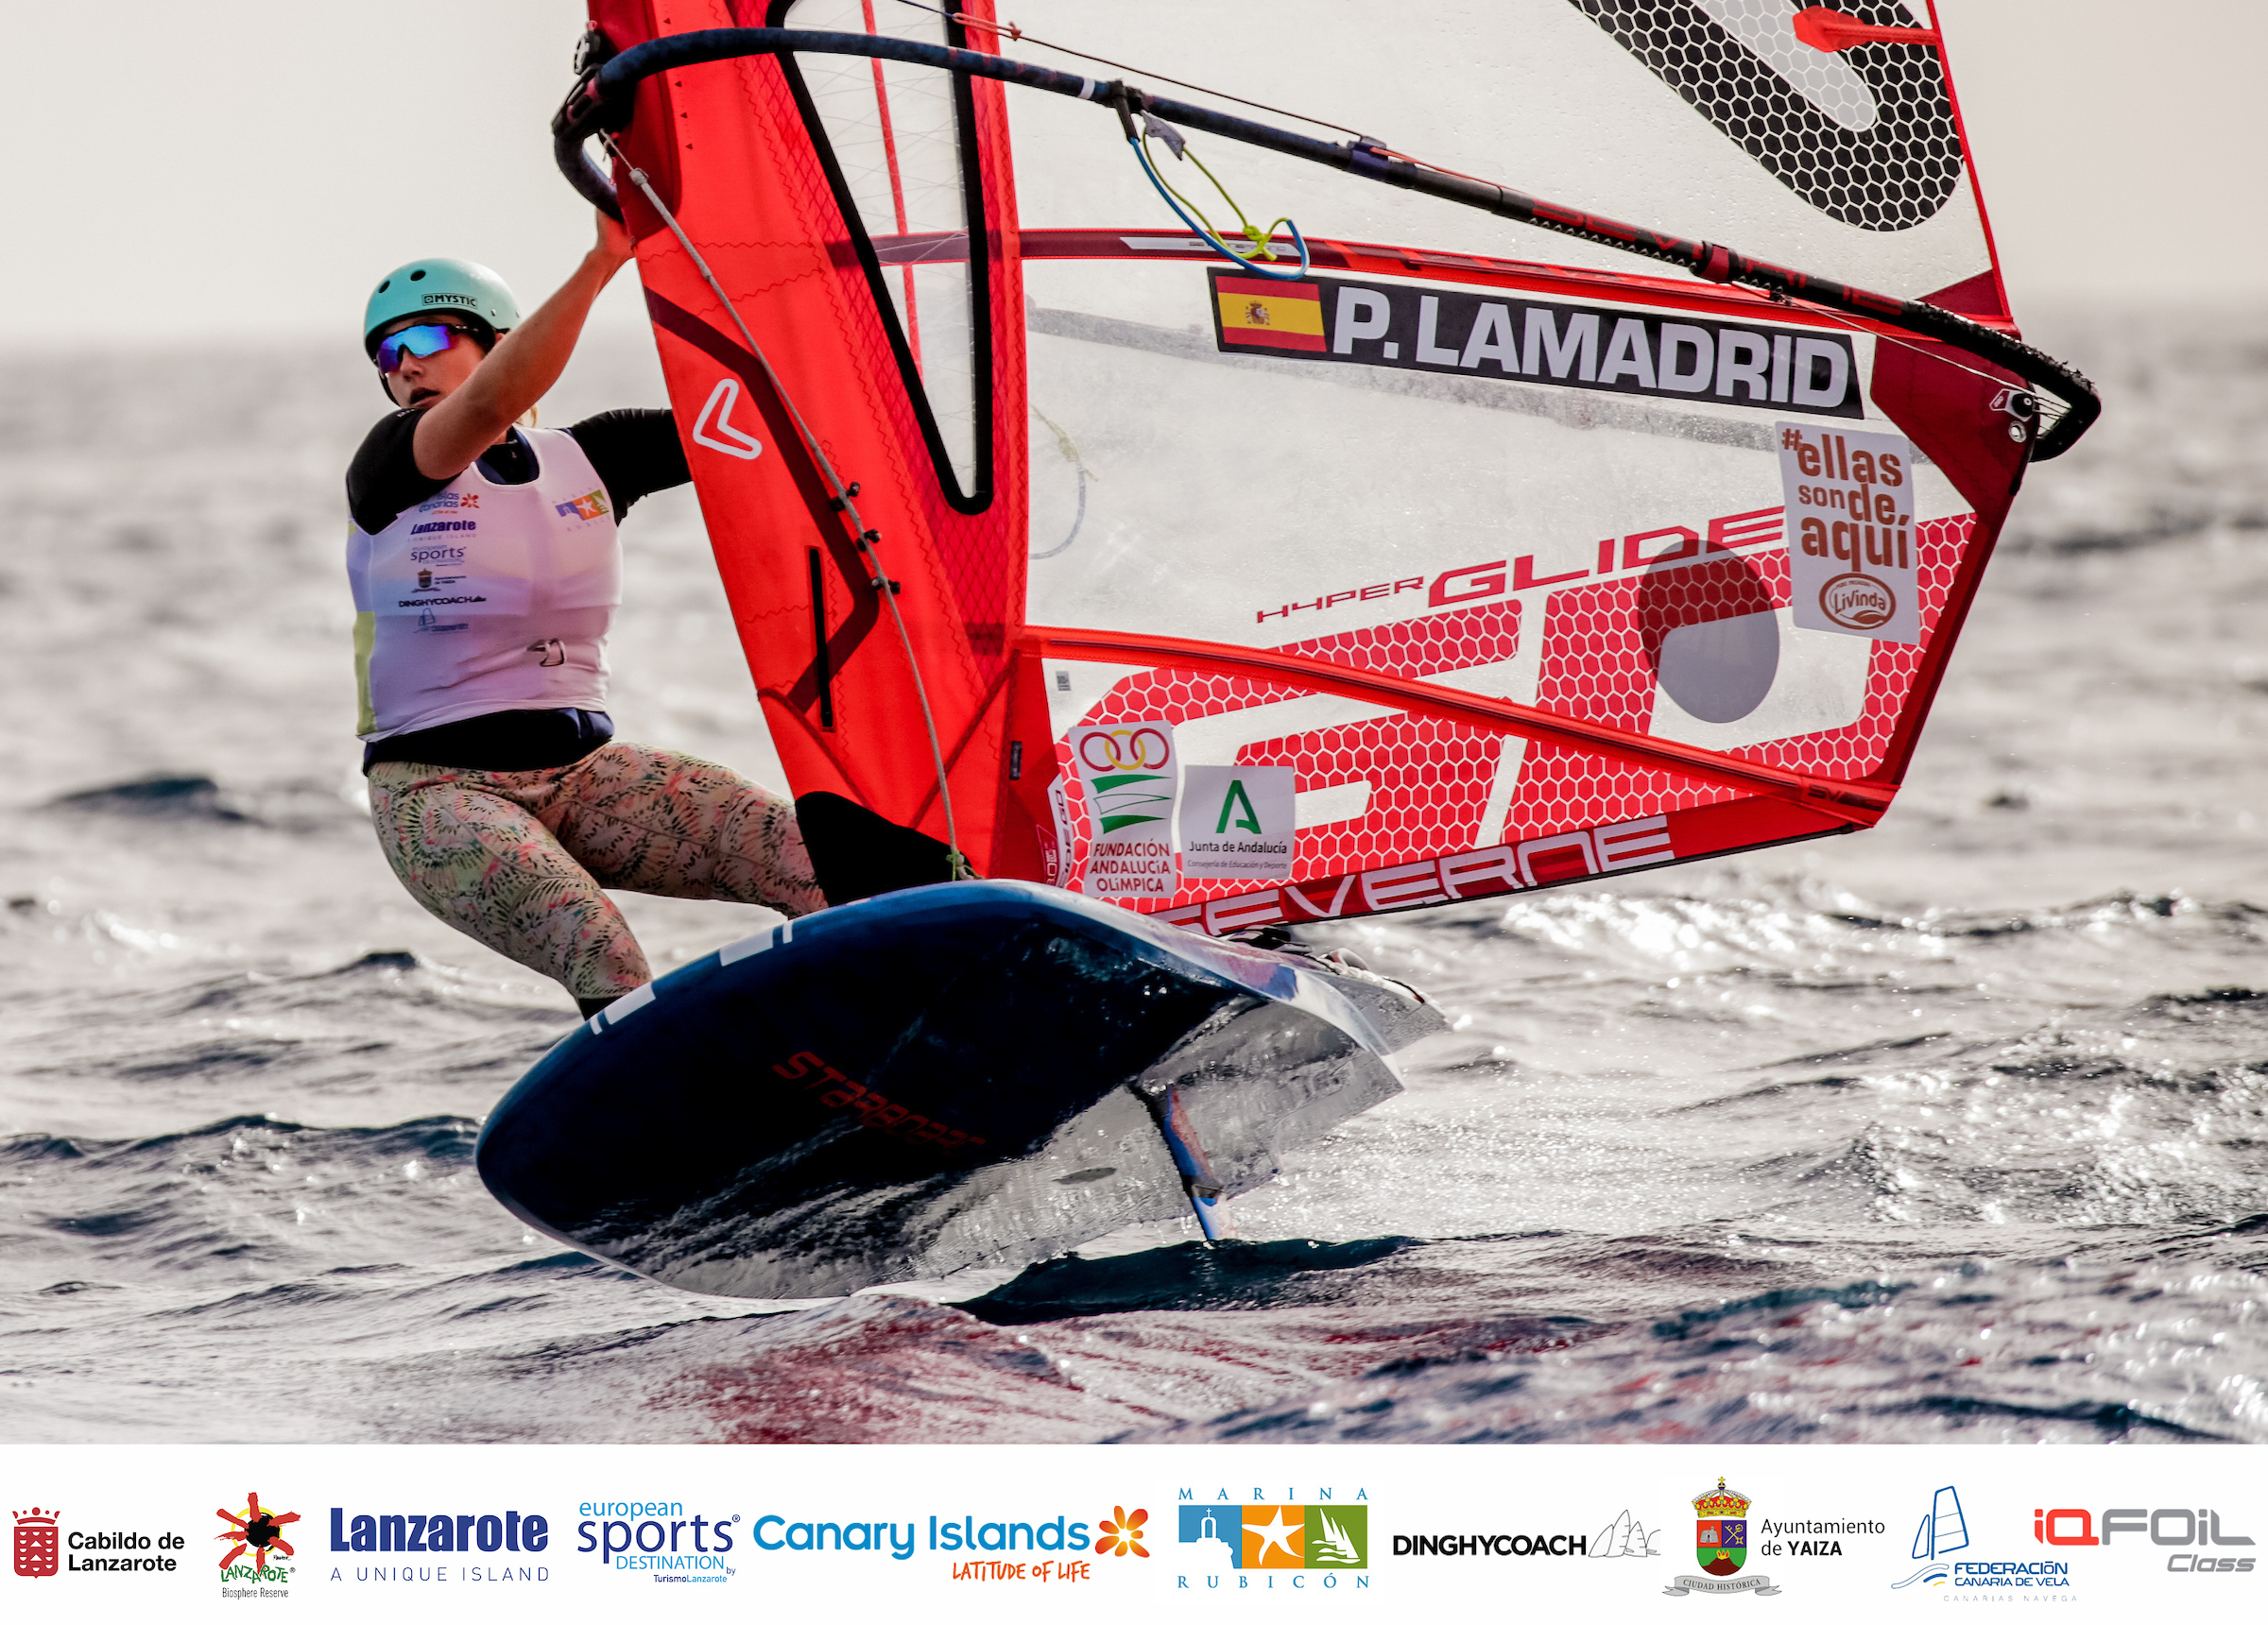 Lanzarote IQFoil Games